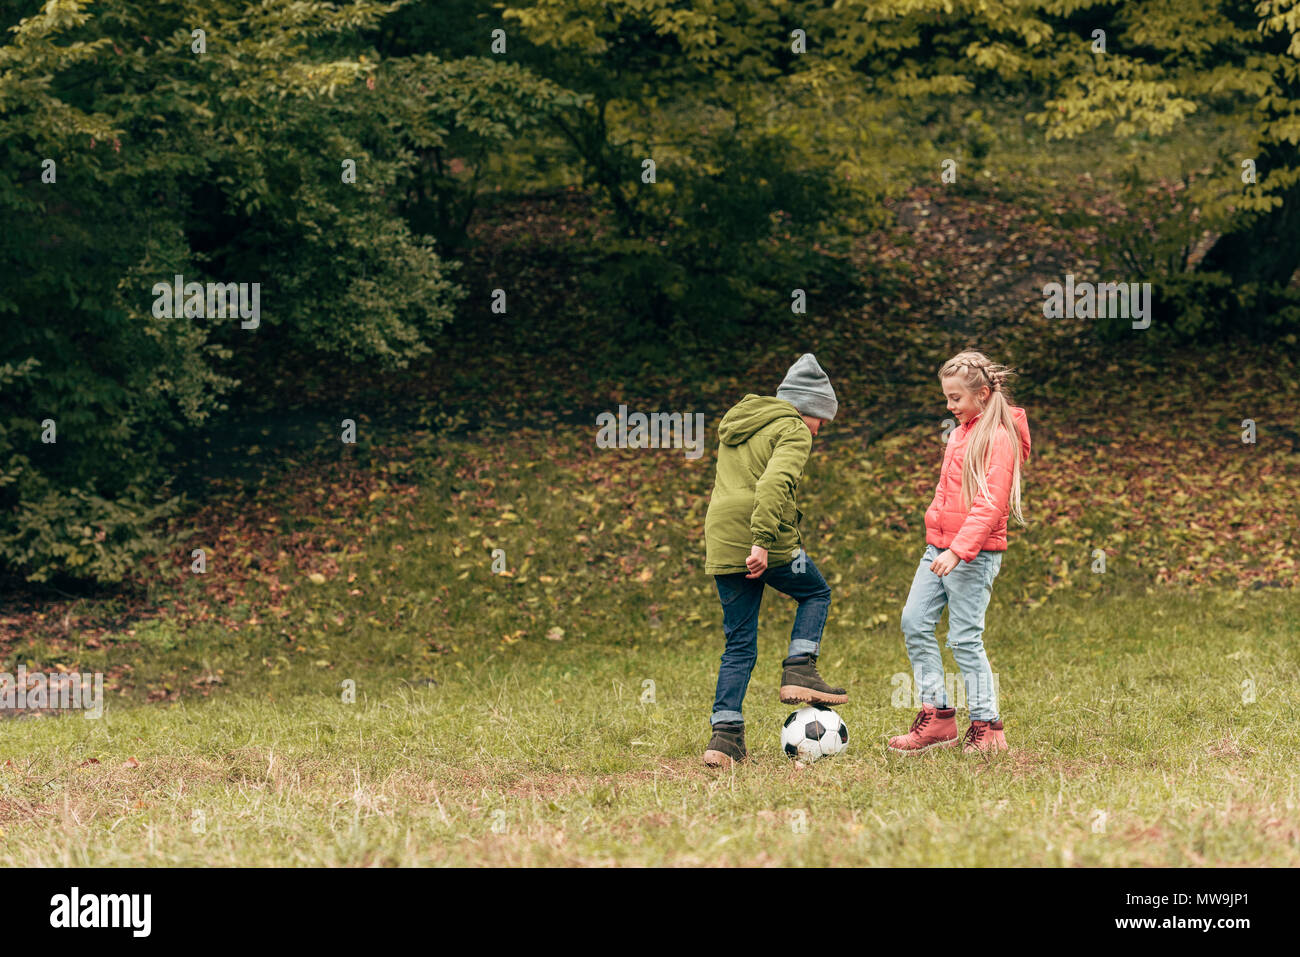 Cute little kids playing soccer in autumn park Banque D'Images